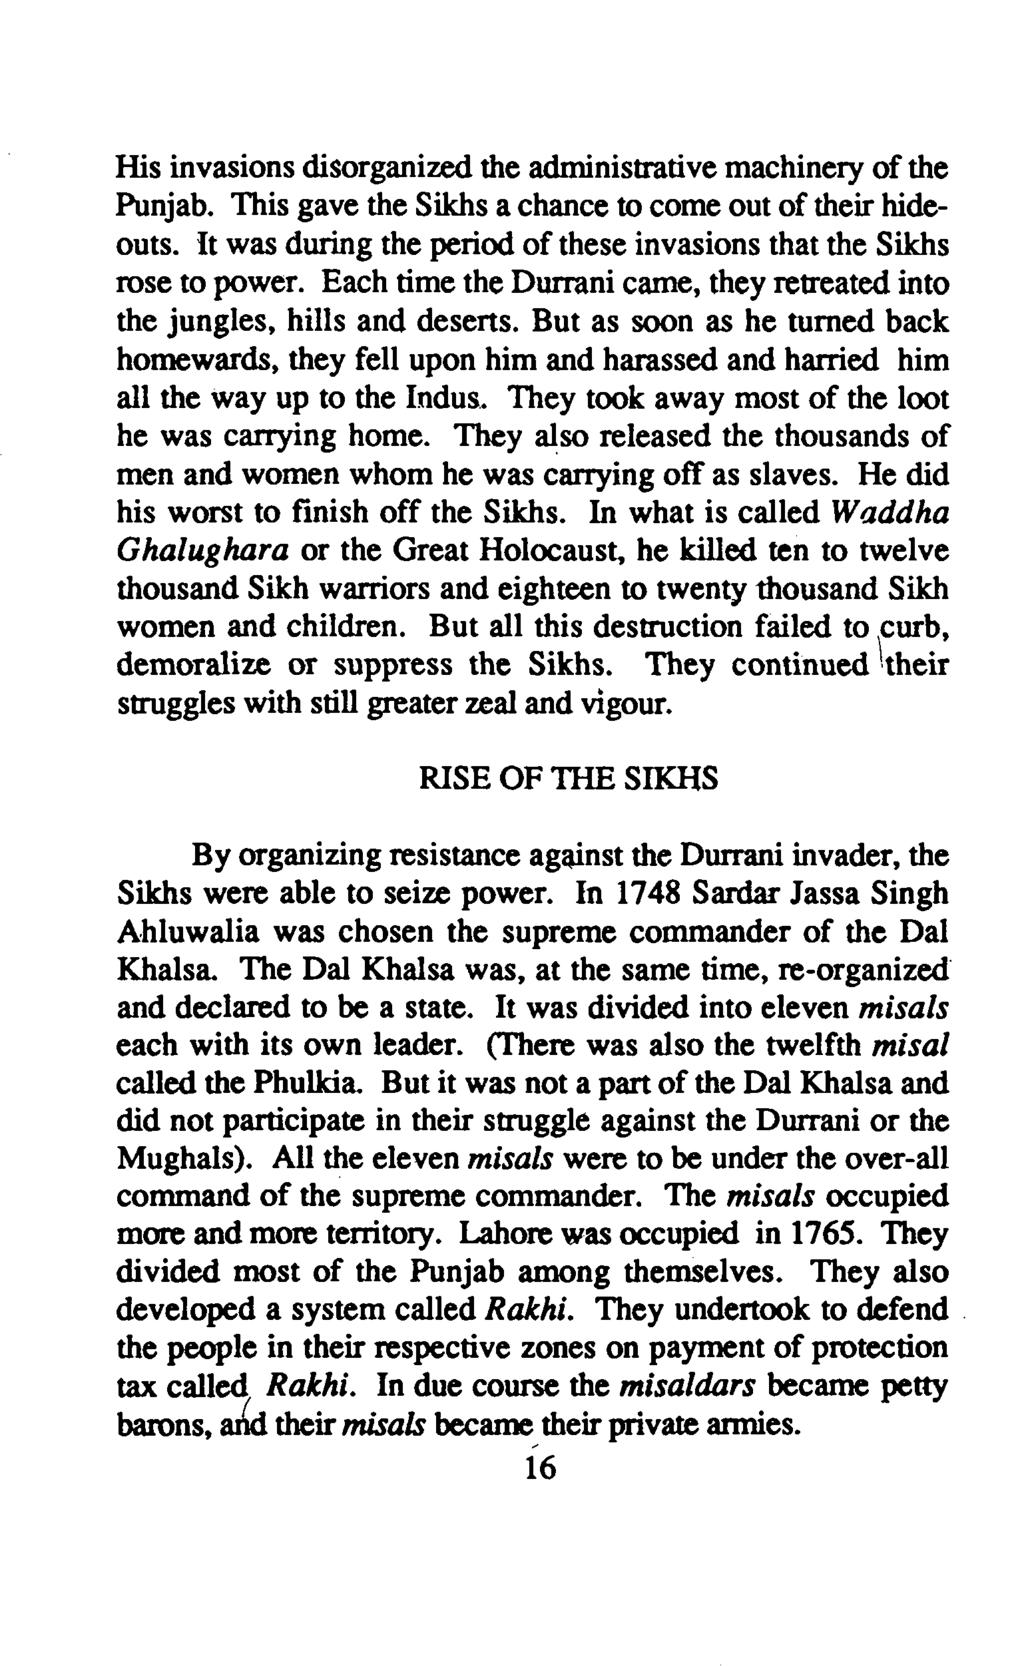 His invasions disorganized the administrative machinery ofthe Punjab. This gave the Sikhs a chance to come out of their hideouts.